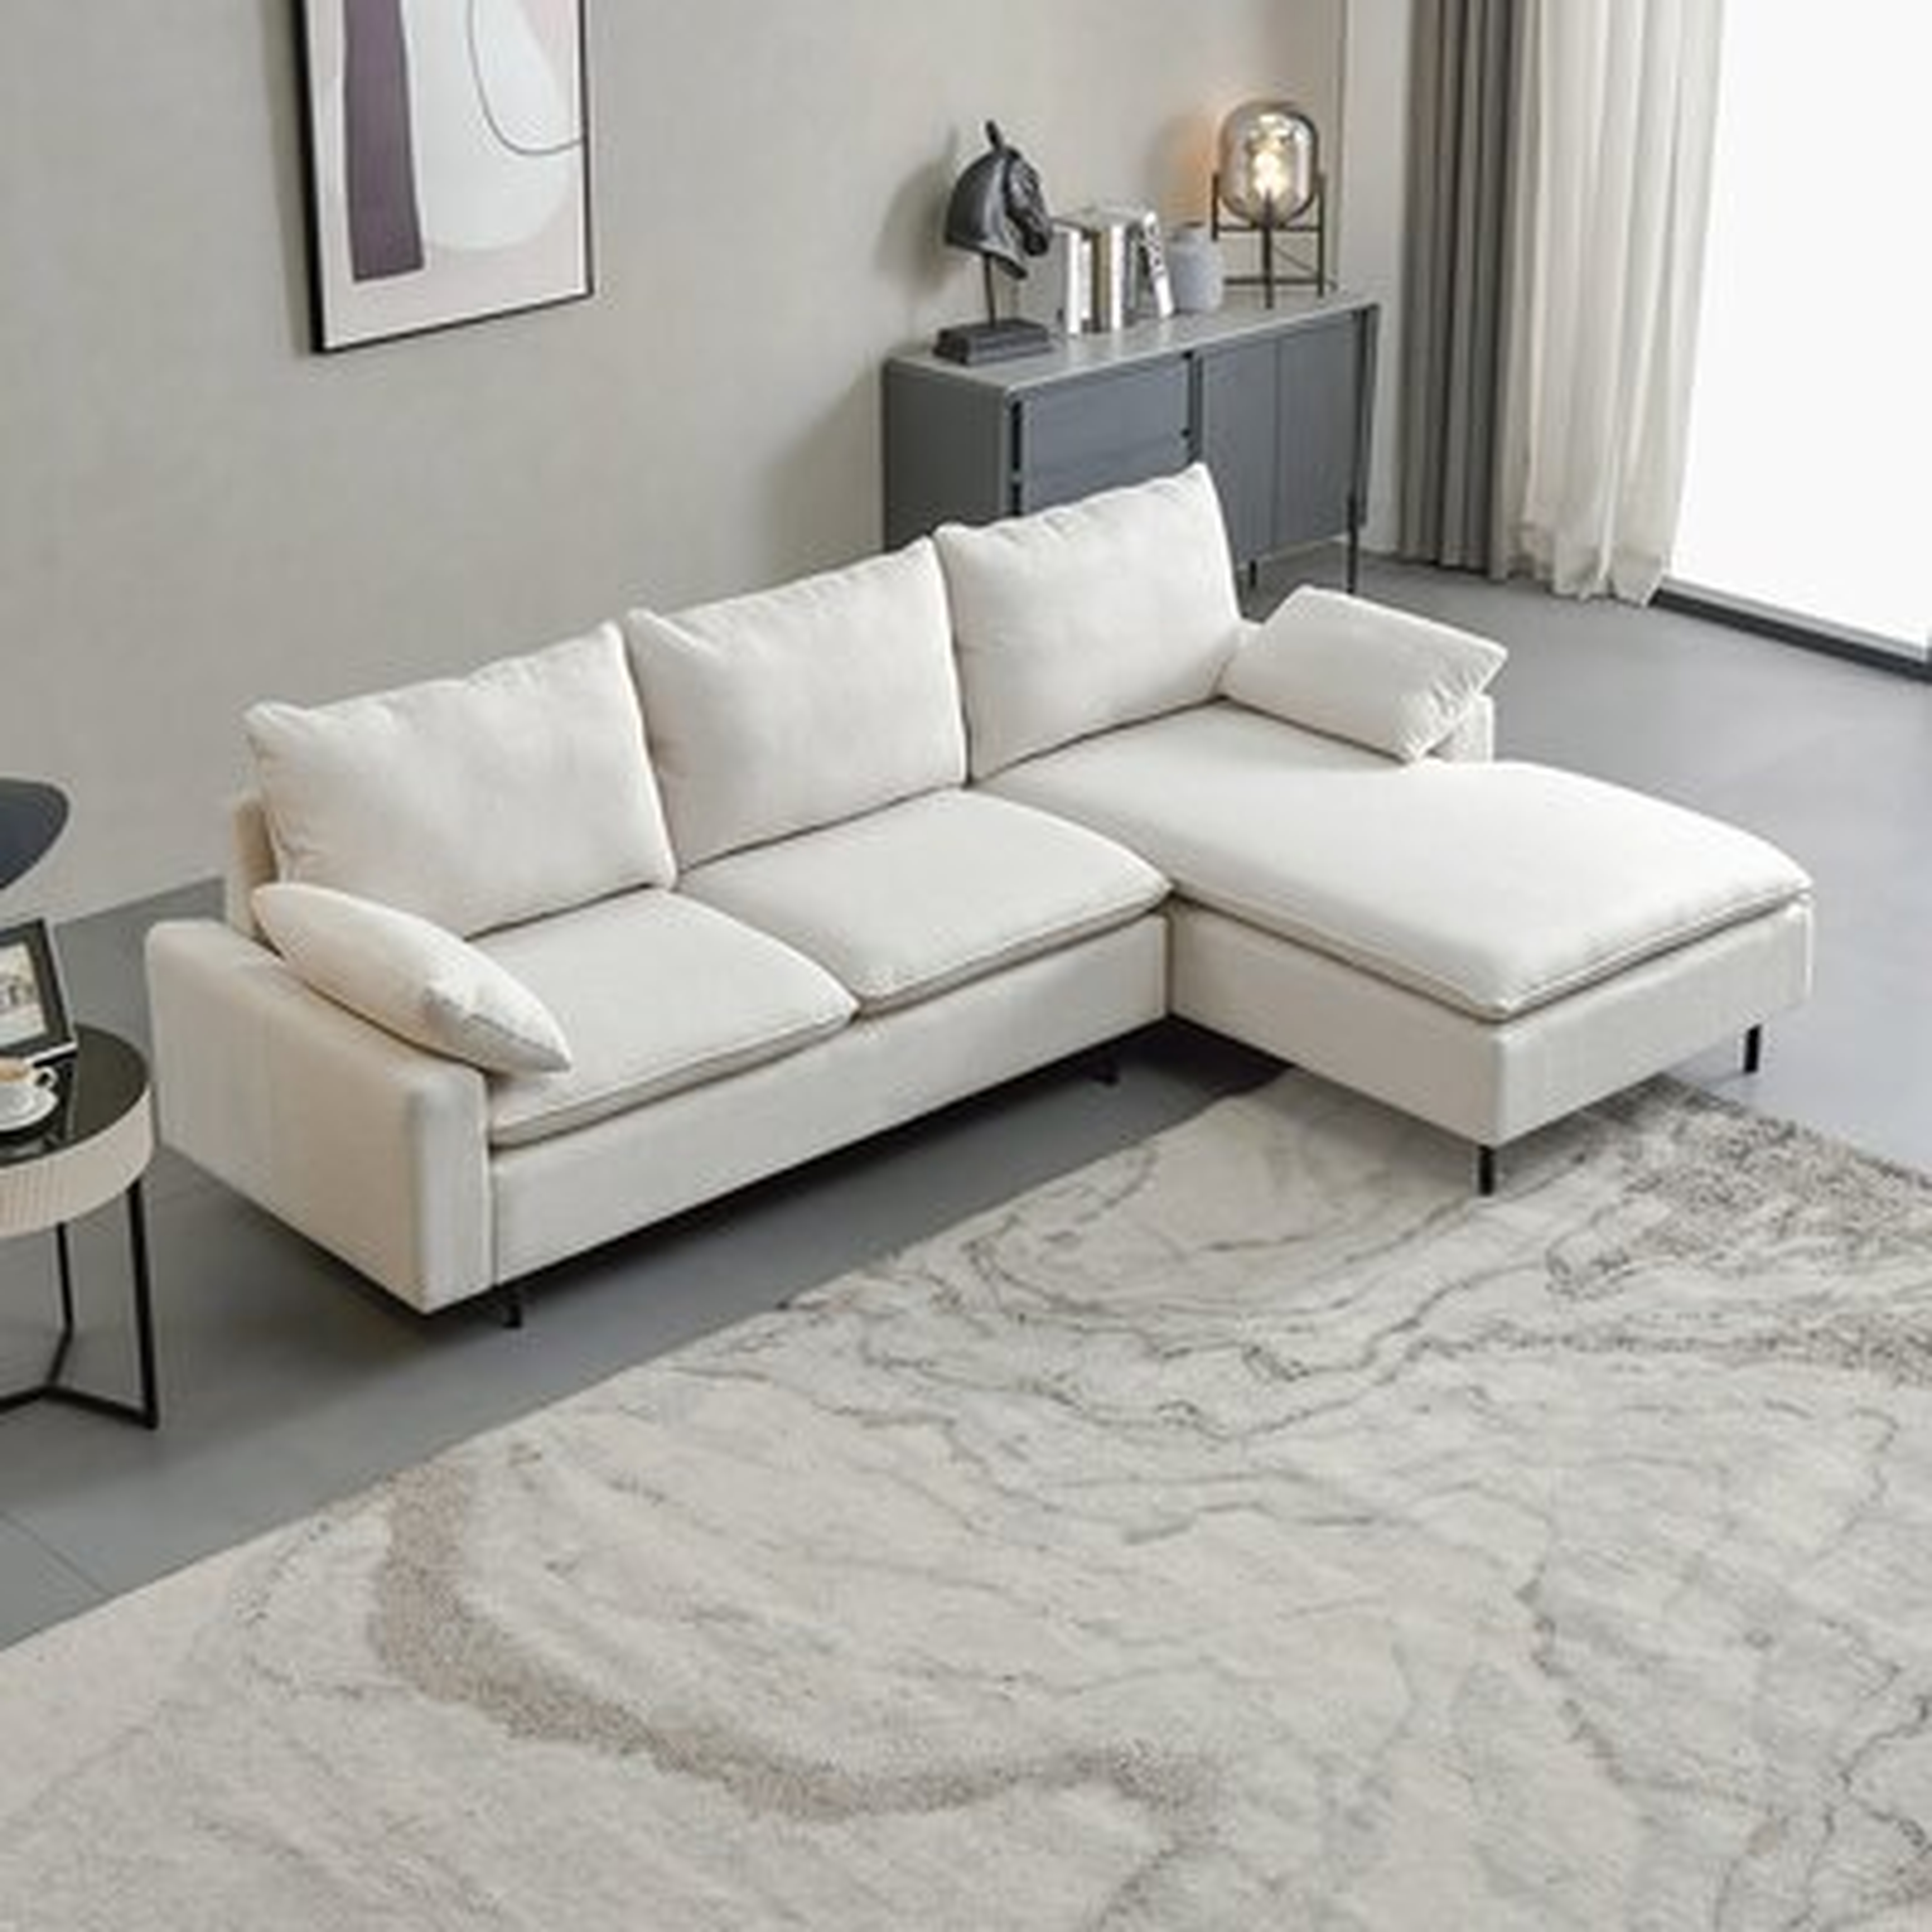 L-Shaped Linen Sectional Sofa With Right Chaise - Wayfair